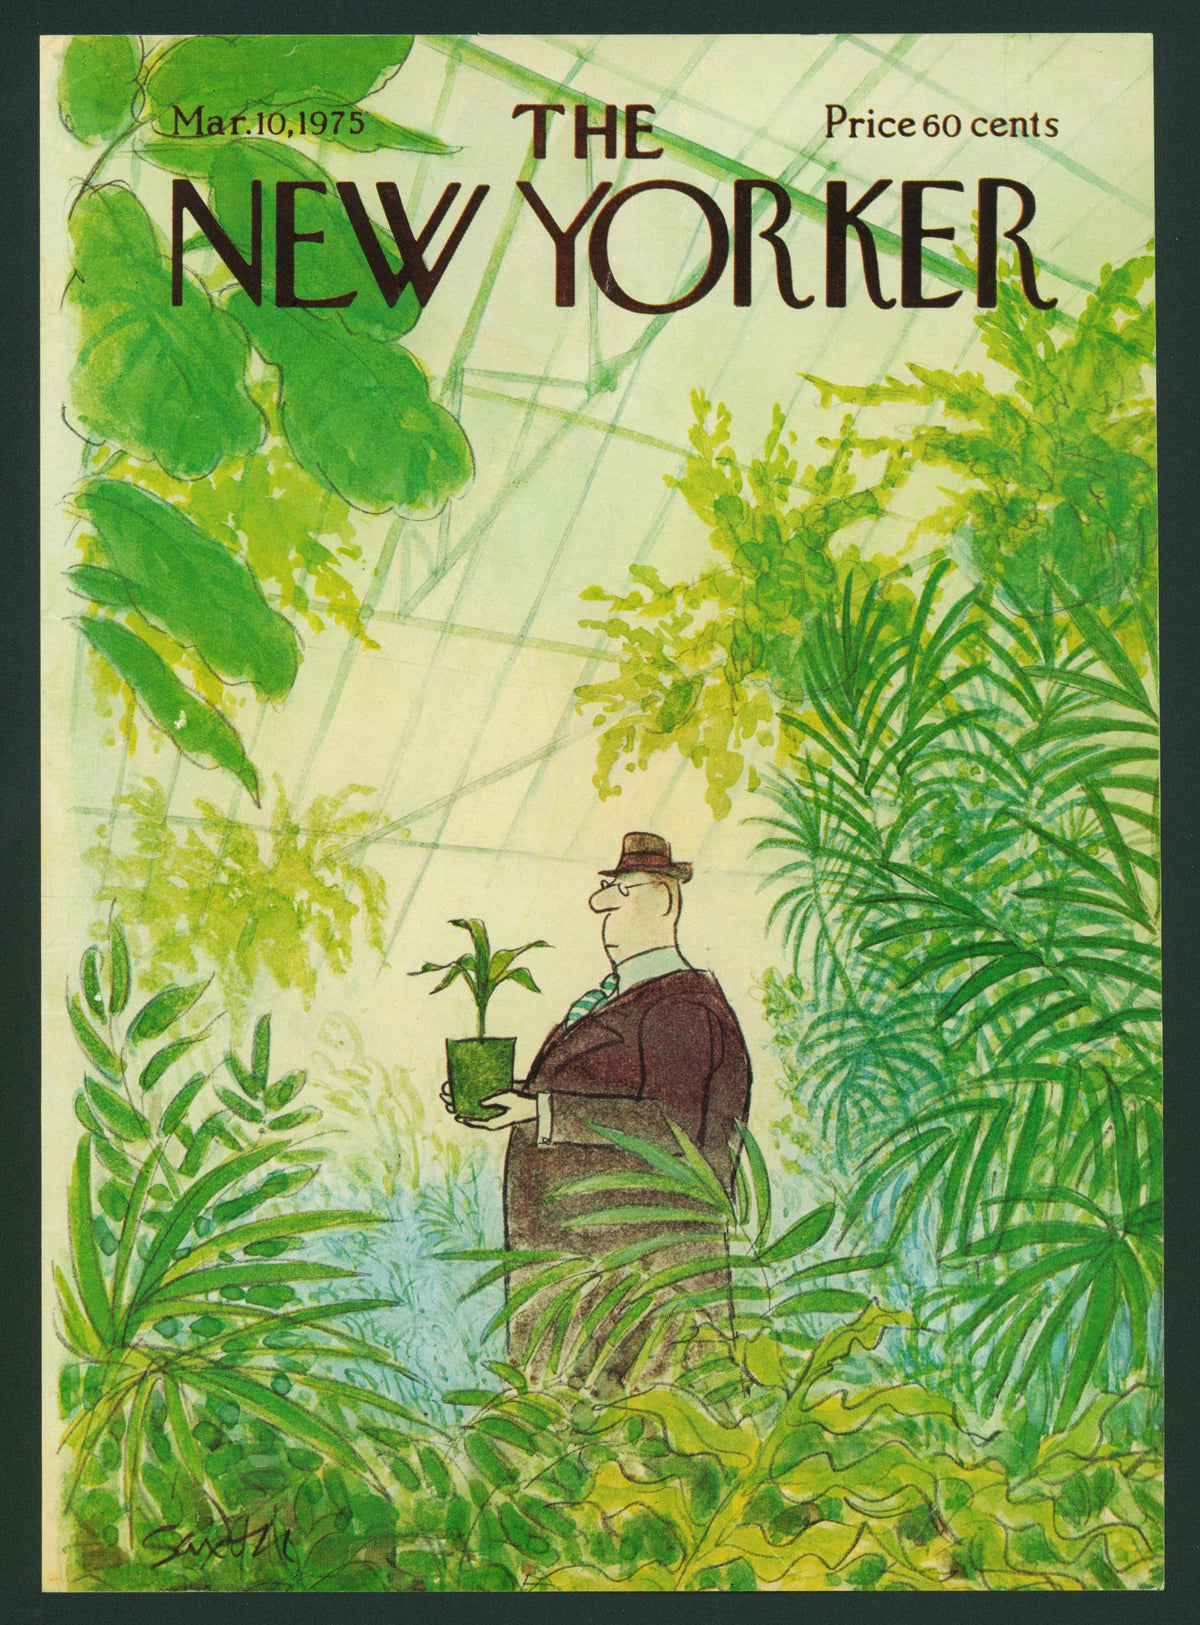 Greenhouse- The New Yorker - Authentic Vintage Antique Print